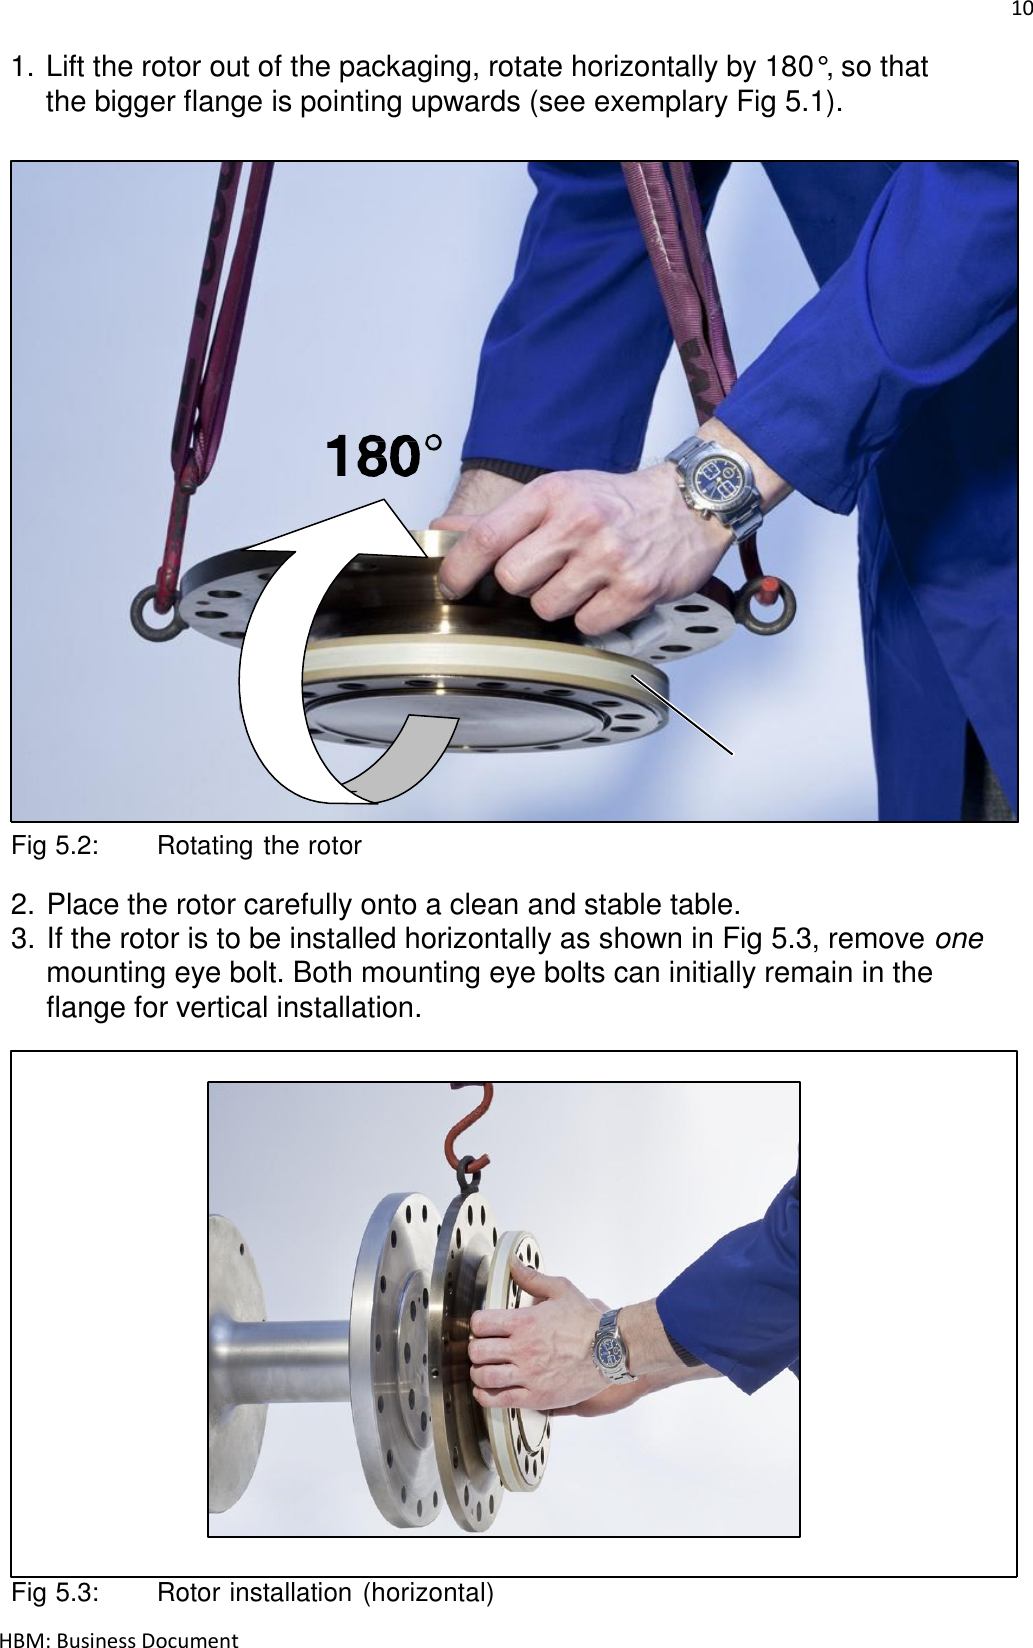 10  HBM: Business Document 1. Lift the rotor out of the packaging, rotate horizontally by 180°, so that the bigger flange is pointing upwards (see exemplary Fig 5.1).                               Flange B    Fig 5.2:   Rotating the rotor  2. Place the rotor carefully onto a clean and stable table. 3. If the rotor is to be installed horizontally as shown in Fig 5.3, remove one mounting eye bolt. Both mounting eye bolts can initially remain in the flange for vertical installation.                           Fig 5.3:   Rotor installation (horizontal) 